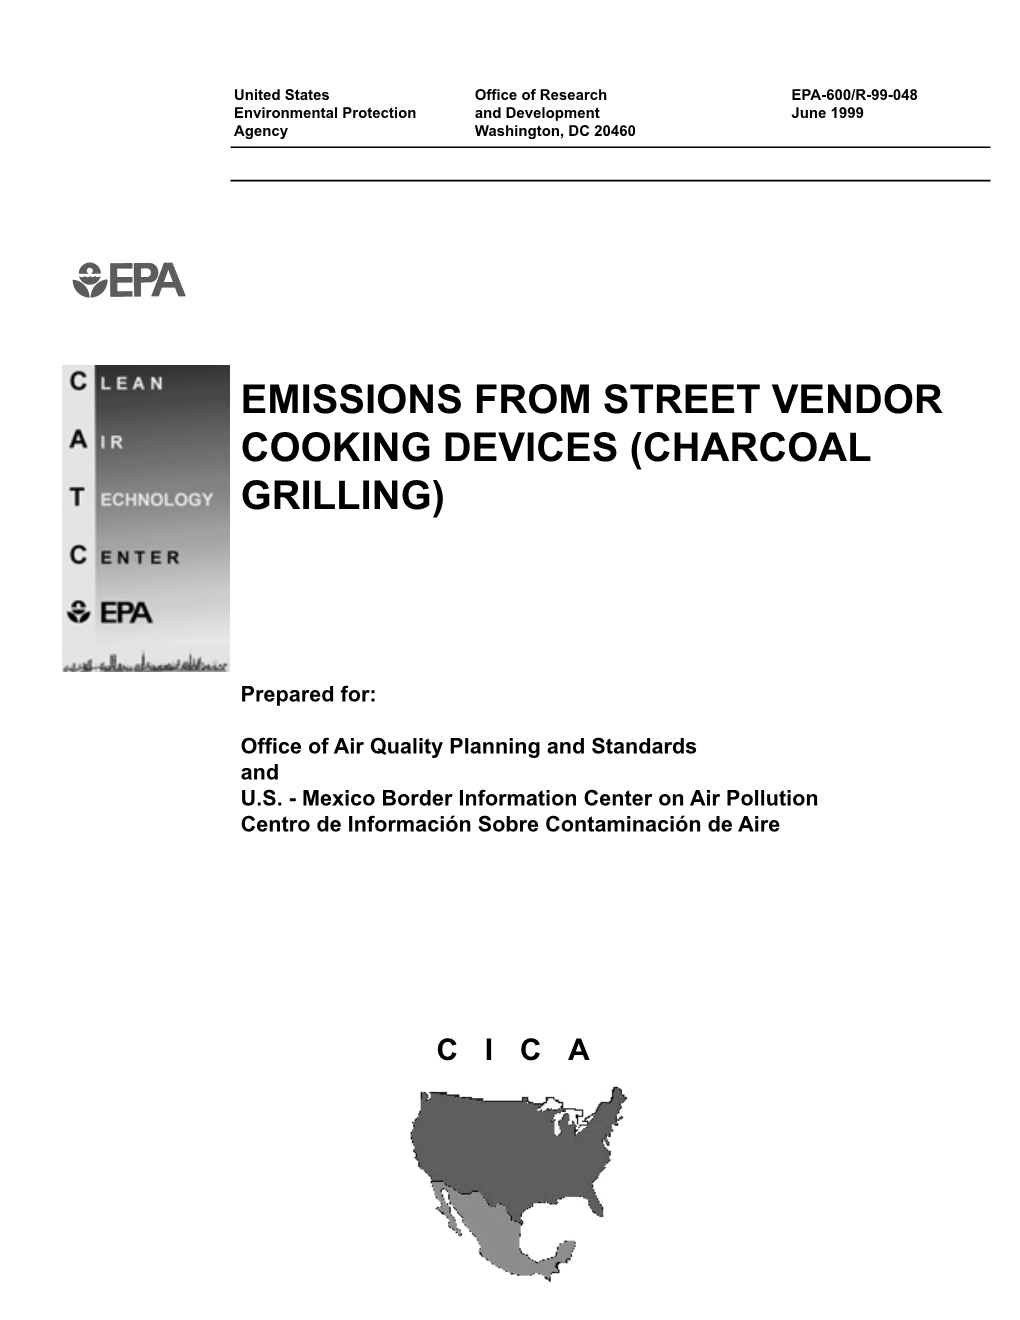 Emissions from Street Vendor Cooking Devices (Charcoal Grilling)